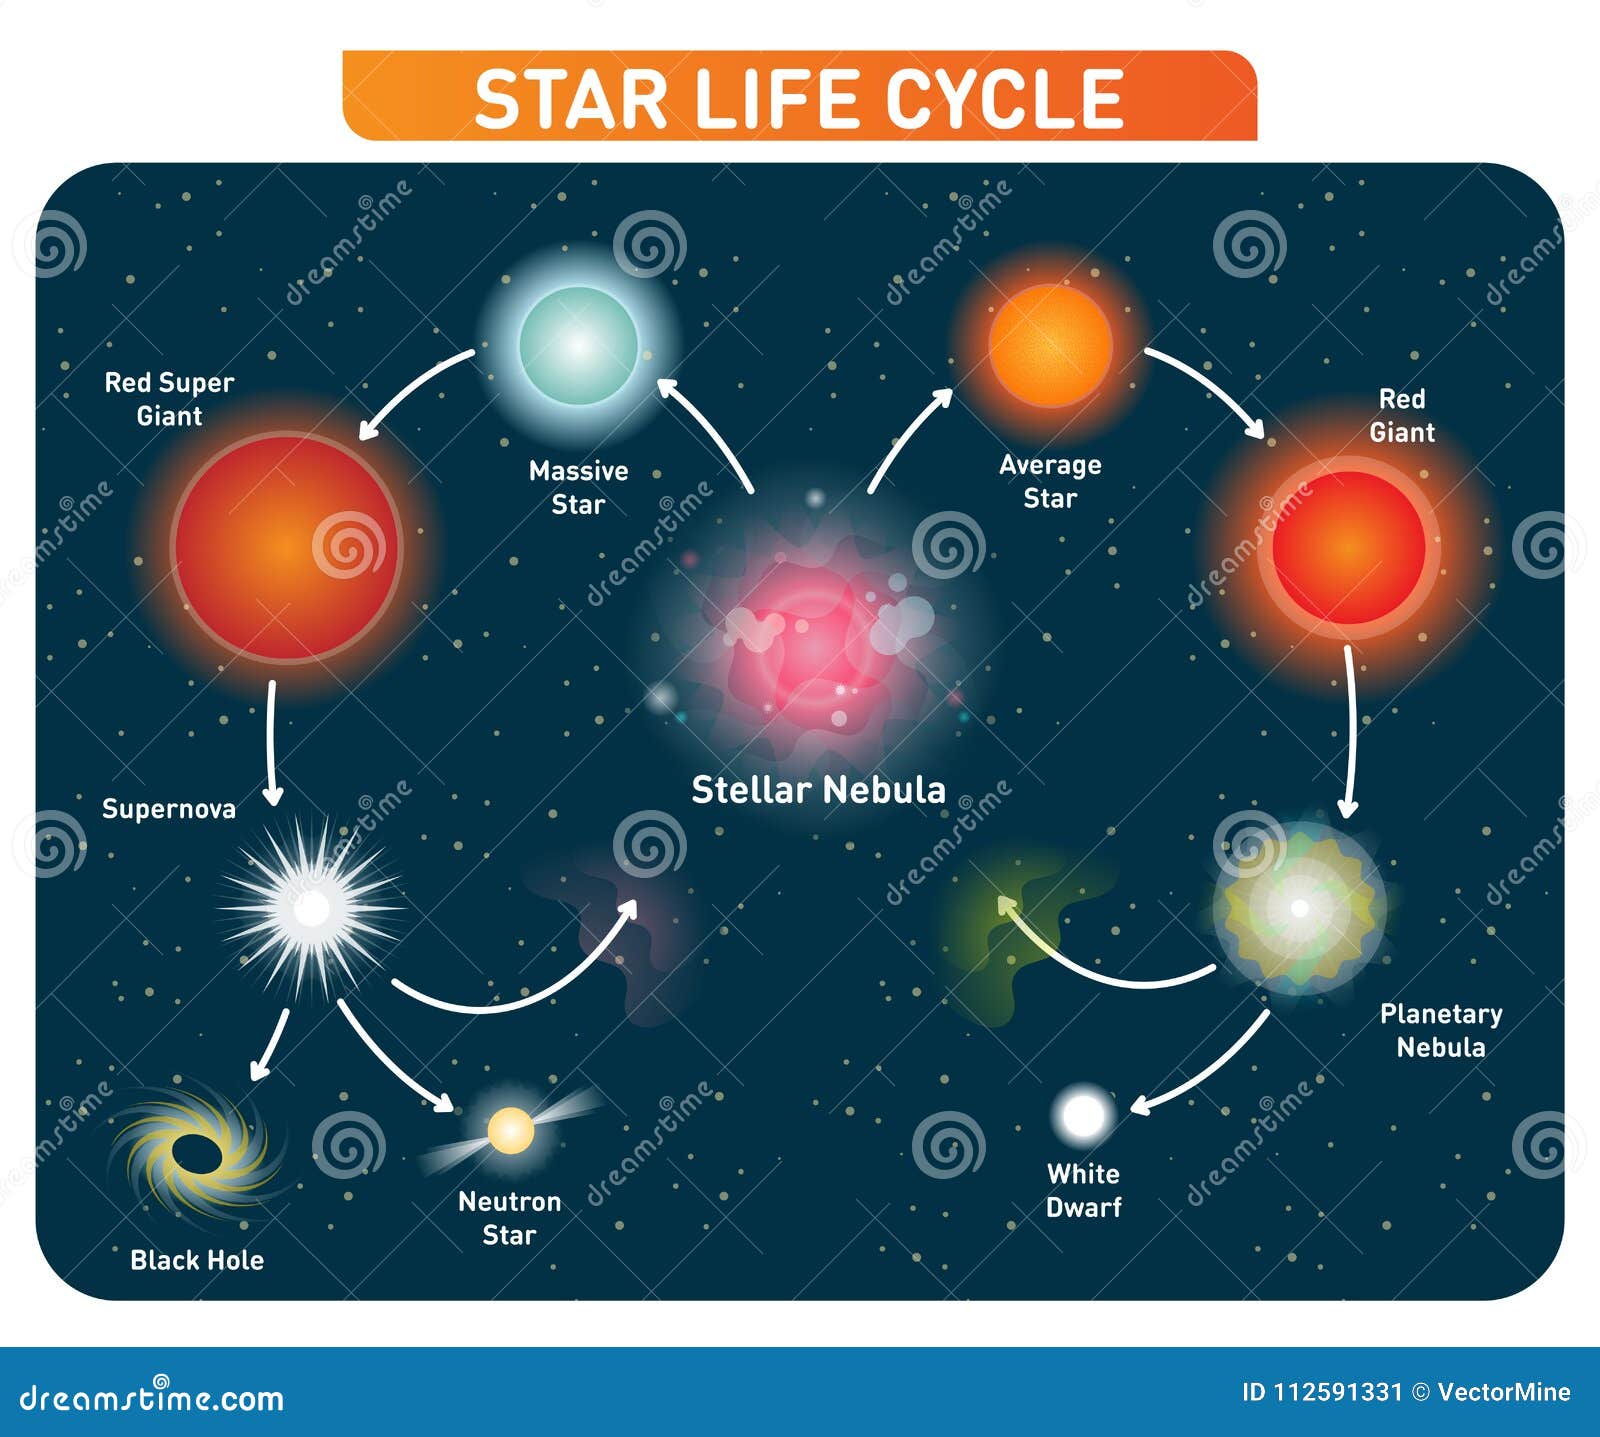 star life cycle steps from stellar nebula to red giant to black hole.   diagram.